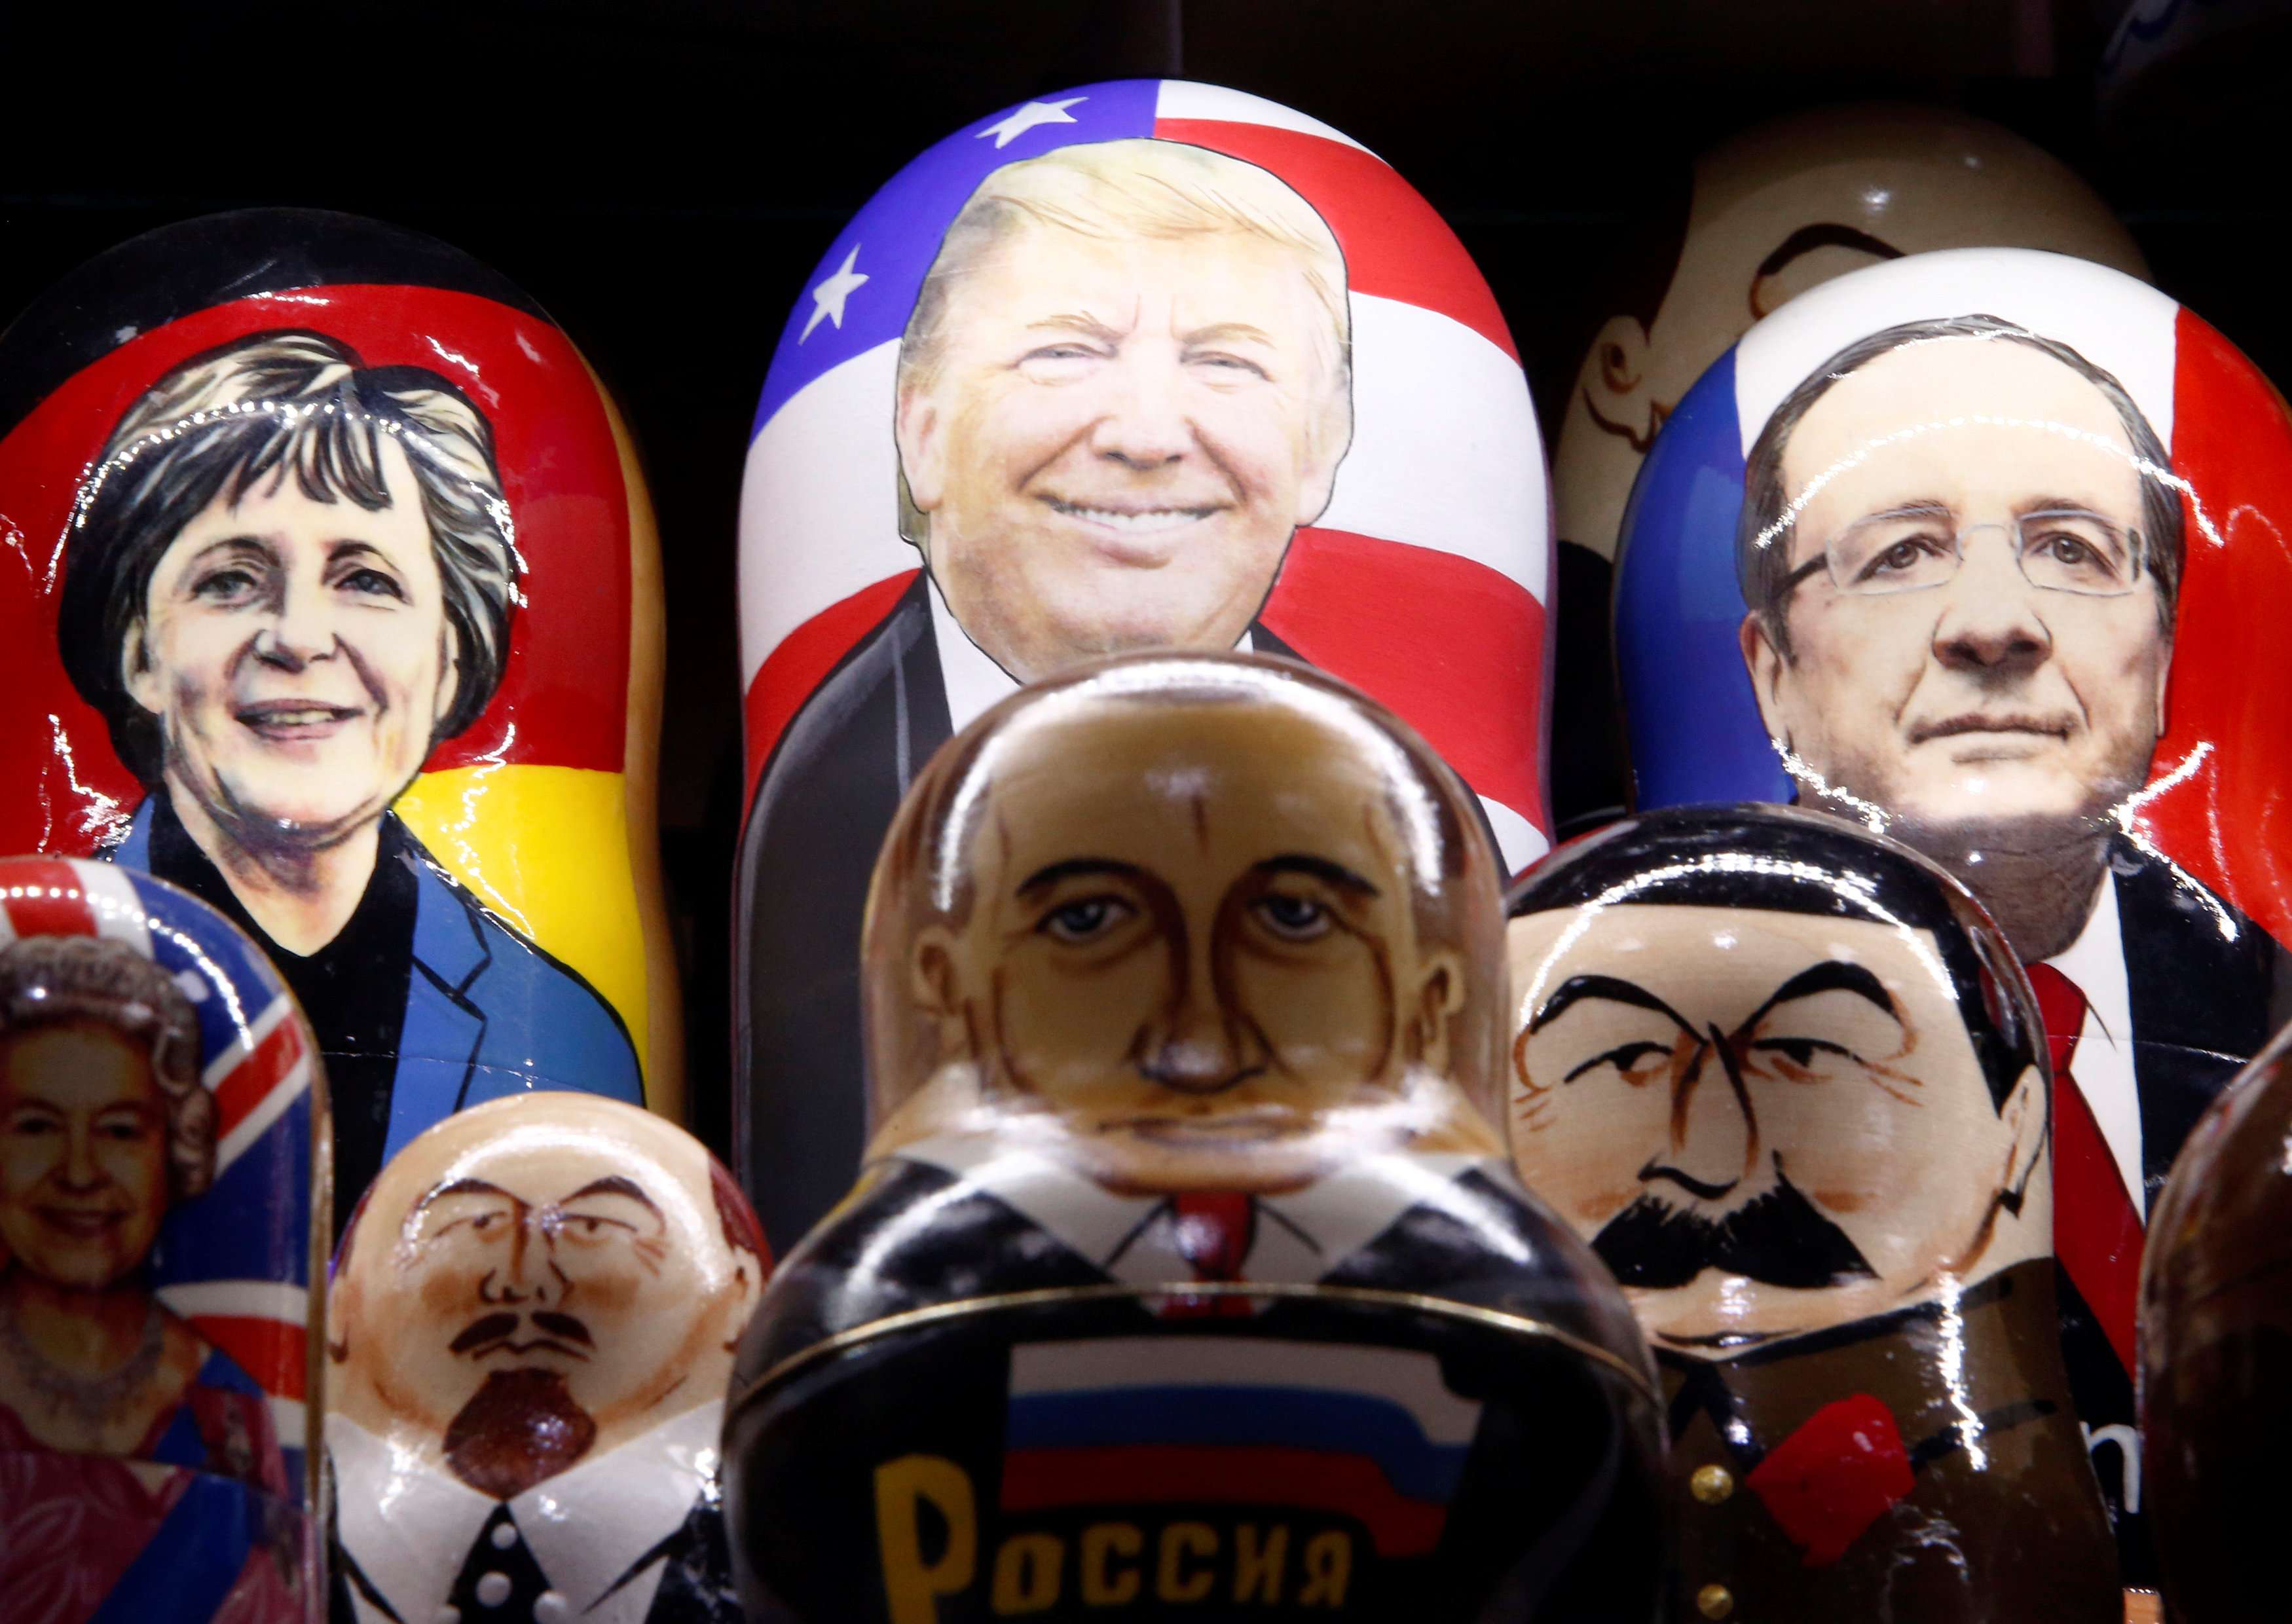 Matryoshka dolls bearing the faces of German Chancellor Angela Merkel, Donald Trump, French President Francois Hollande, Britain’s Queen Elizabeth, Vladimir Lenin, Russian President Vladimir Putin and Josef Stalin are displayed at a souvenir shop in central Moscow. Photo: Reuters